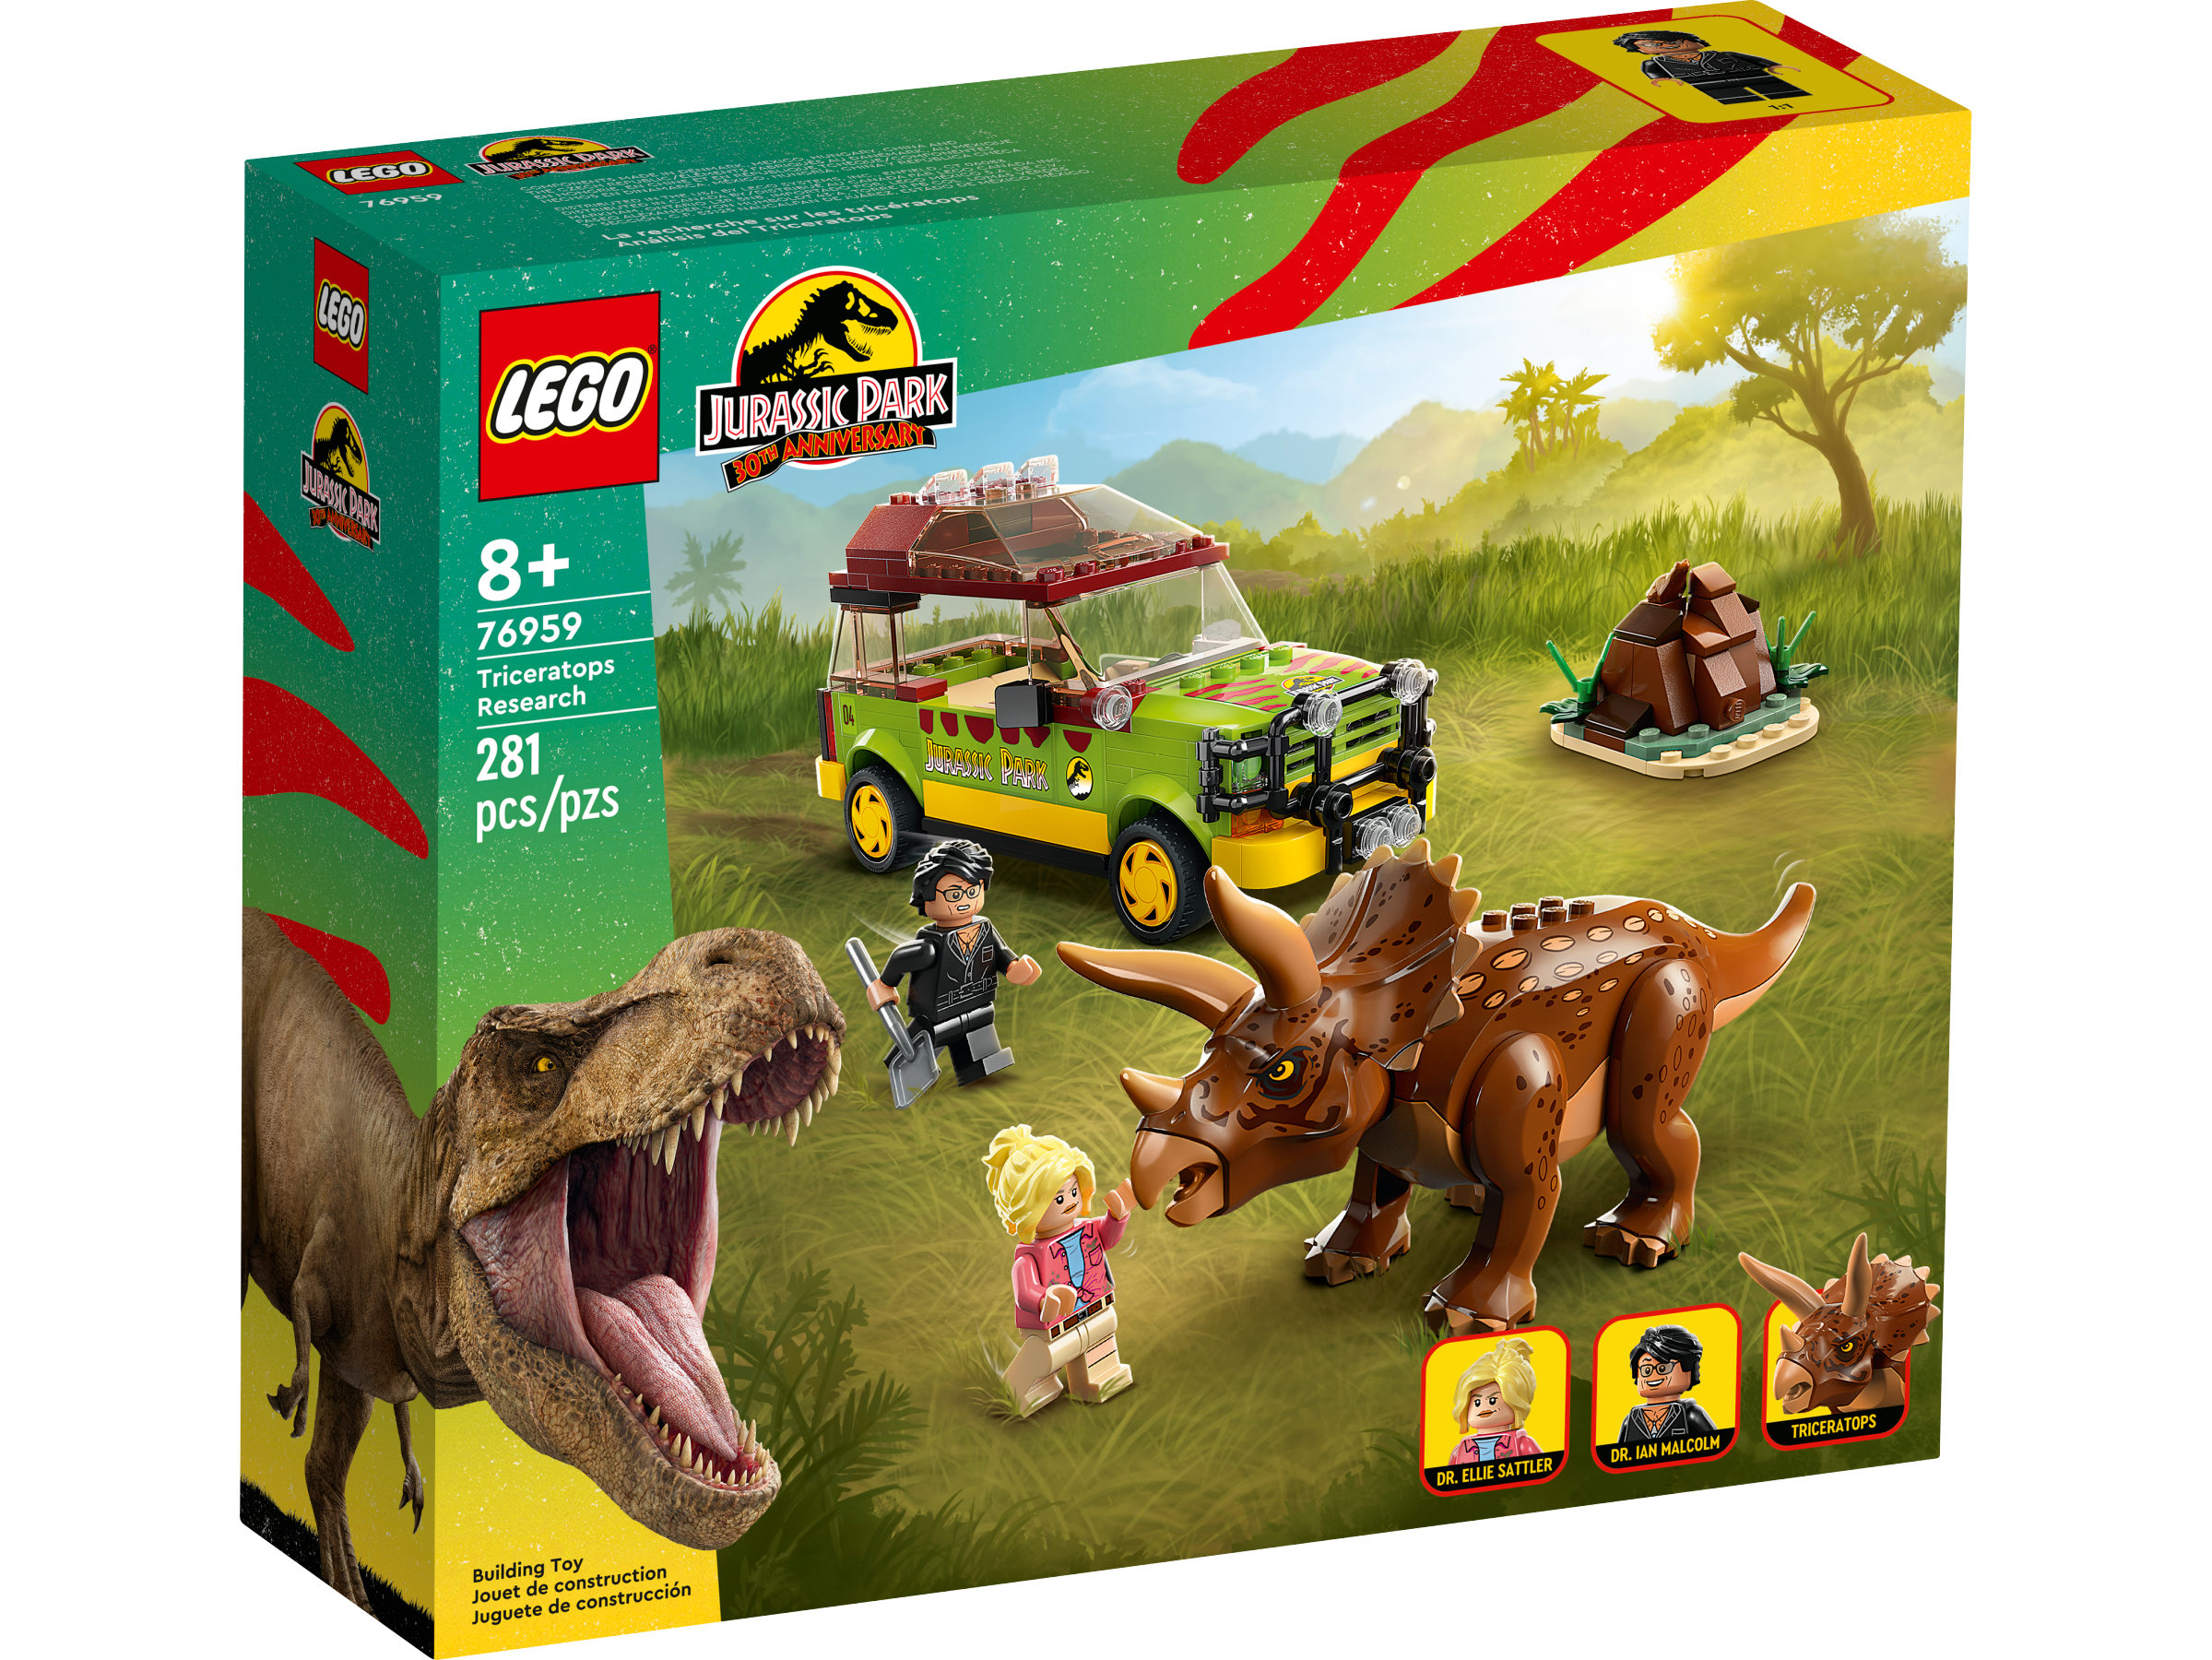 Kracht Actief heroïsch Triceratops Research 76959 | Jurassic World™ | Buy online at the Official  LEGO® Shop US